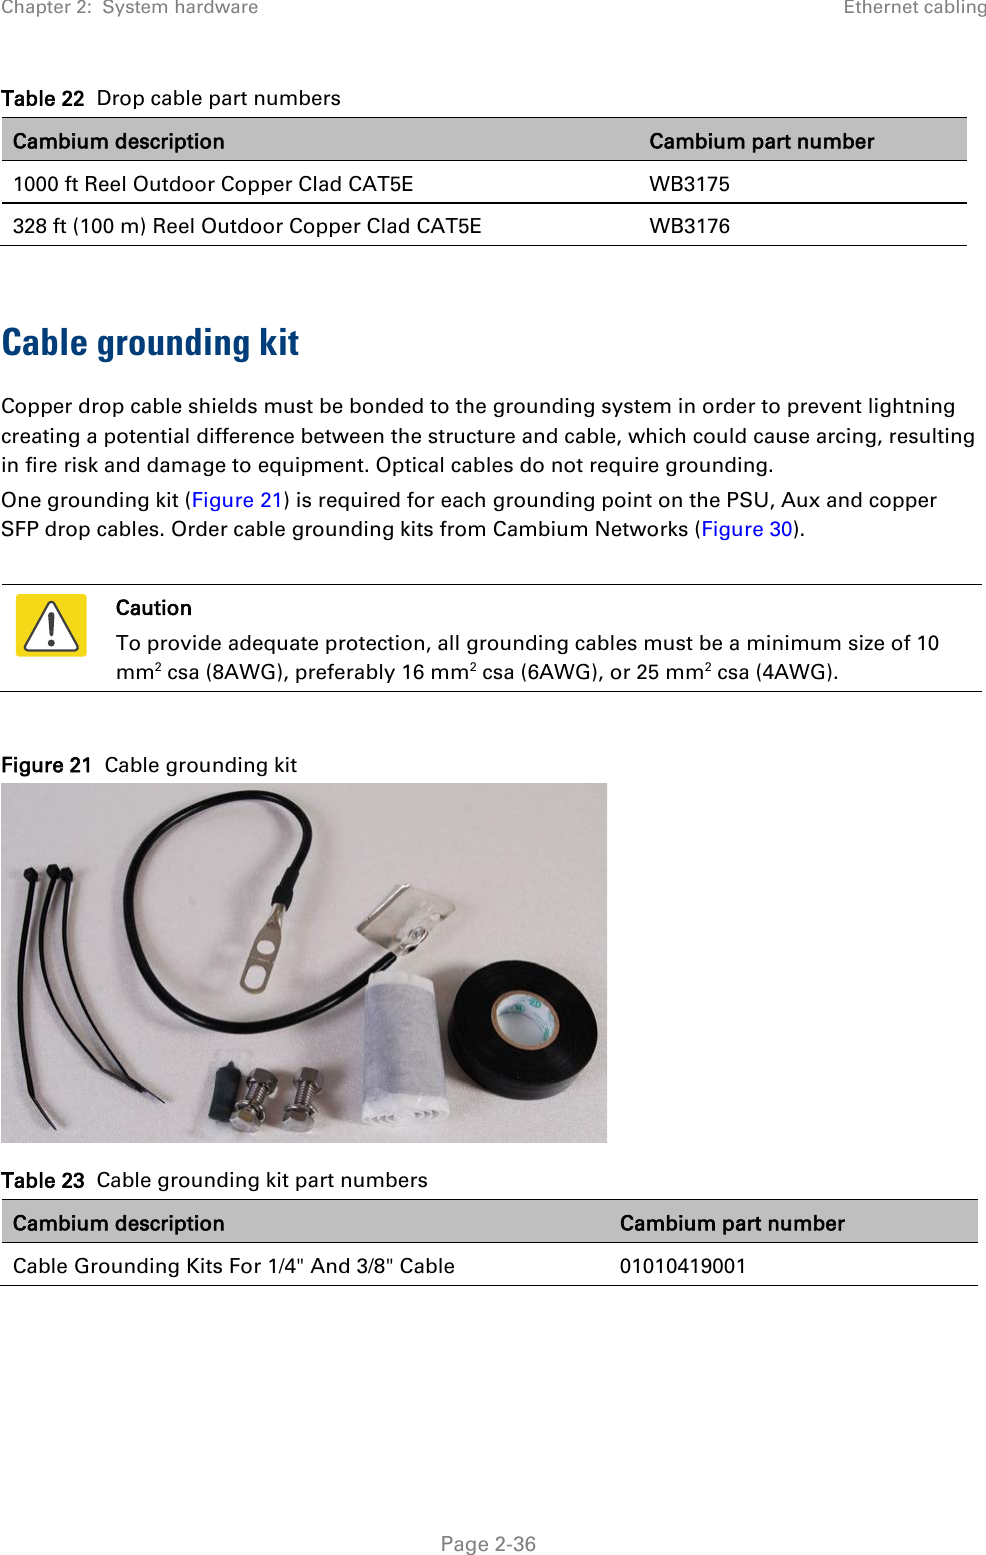 Chapter 2:  System hardware Ethernet cabling  Table 22  Drop cable part numbers Cambium description Cambium part number 1000 ft Reel Outdoor Copper Clad CAT5E WB3175 328 ft (100 m) Reel Outdoor Copper Clad CAT5E WB3176  Cable grounding kit Copper drop cable shields must be bonded to the grounding system in order to prevent lightning creating a potential difference between the structure and cable, which could cause arcing, resulting in fire risk and damage to equipment. Optical cables do not require grounding. One grounding kit (Figure 21) is required for each grounding point on the PSU, Aux and copper SFP drop cables. Order cable grounding kits from Cambium Networks (Figure 30).   Caution To provide adequate protection, all grounding cables must be a minimum size of 10 mm2 csa (8AWG), preferably 16 mm2 csa (6AWG), or 25 mm2 csa (4AWG).  Figure 21  Cable grounding kit  Table 23  Cable grounding kit part numbers Cambium description Cambium part number Cable Grounding Kits For 1/4&quot; And 3/8&quot; Cable 01010419001      Page 2-36 